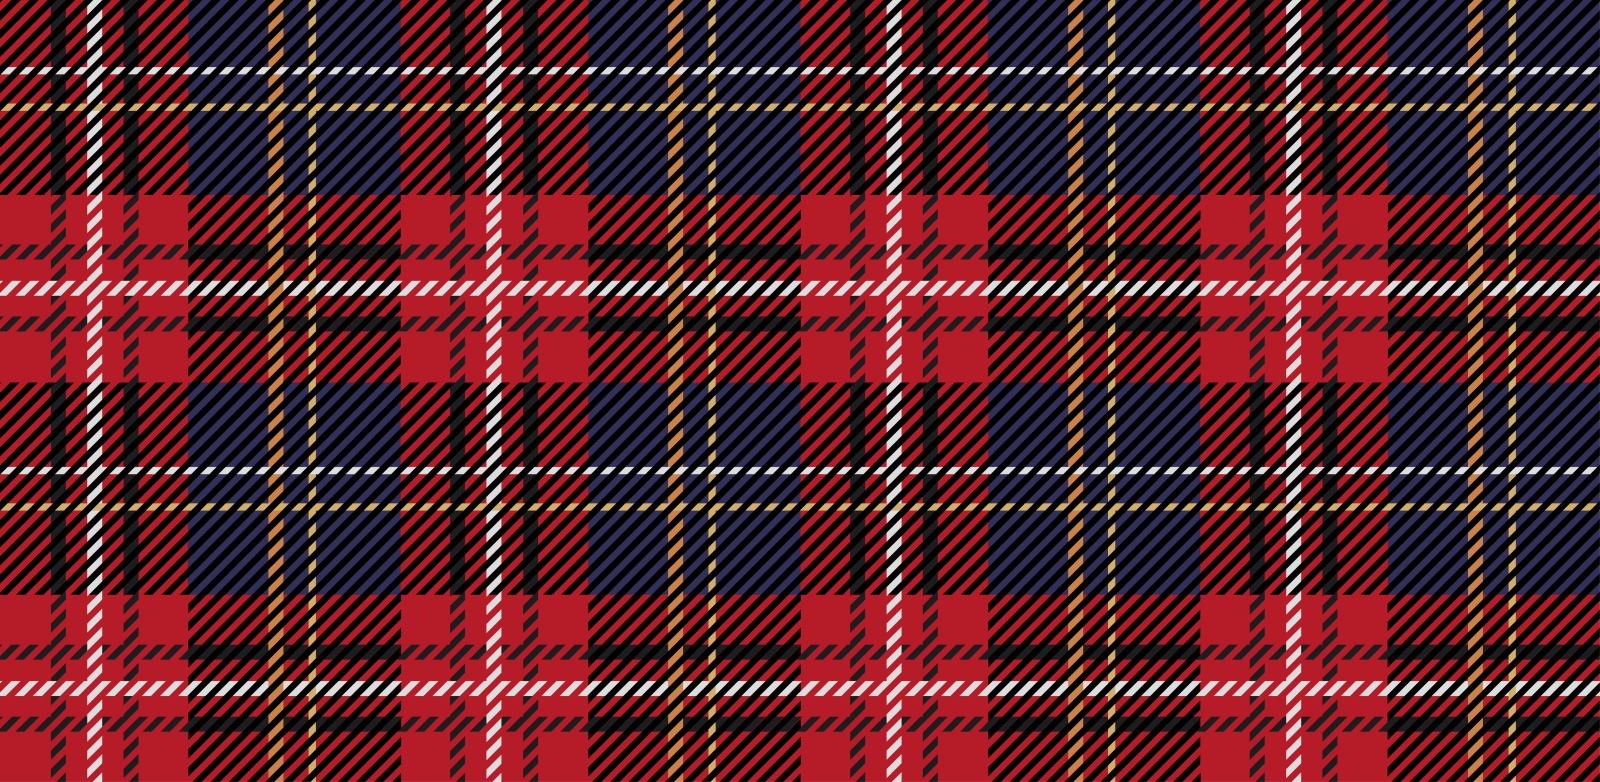 Printed tartan toppers on rice paper or icing